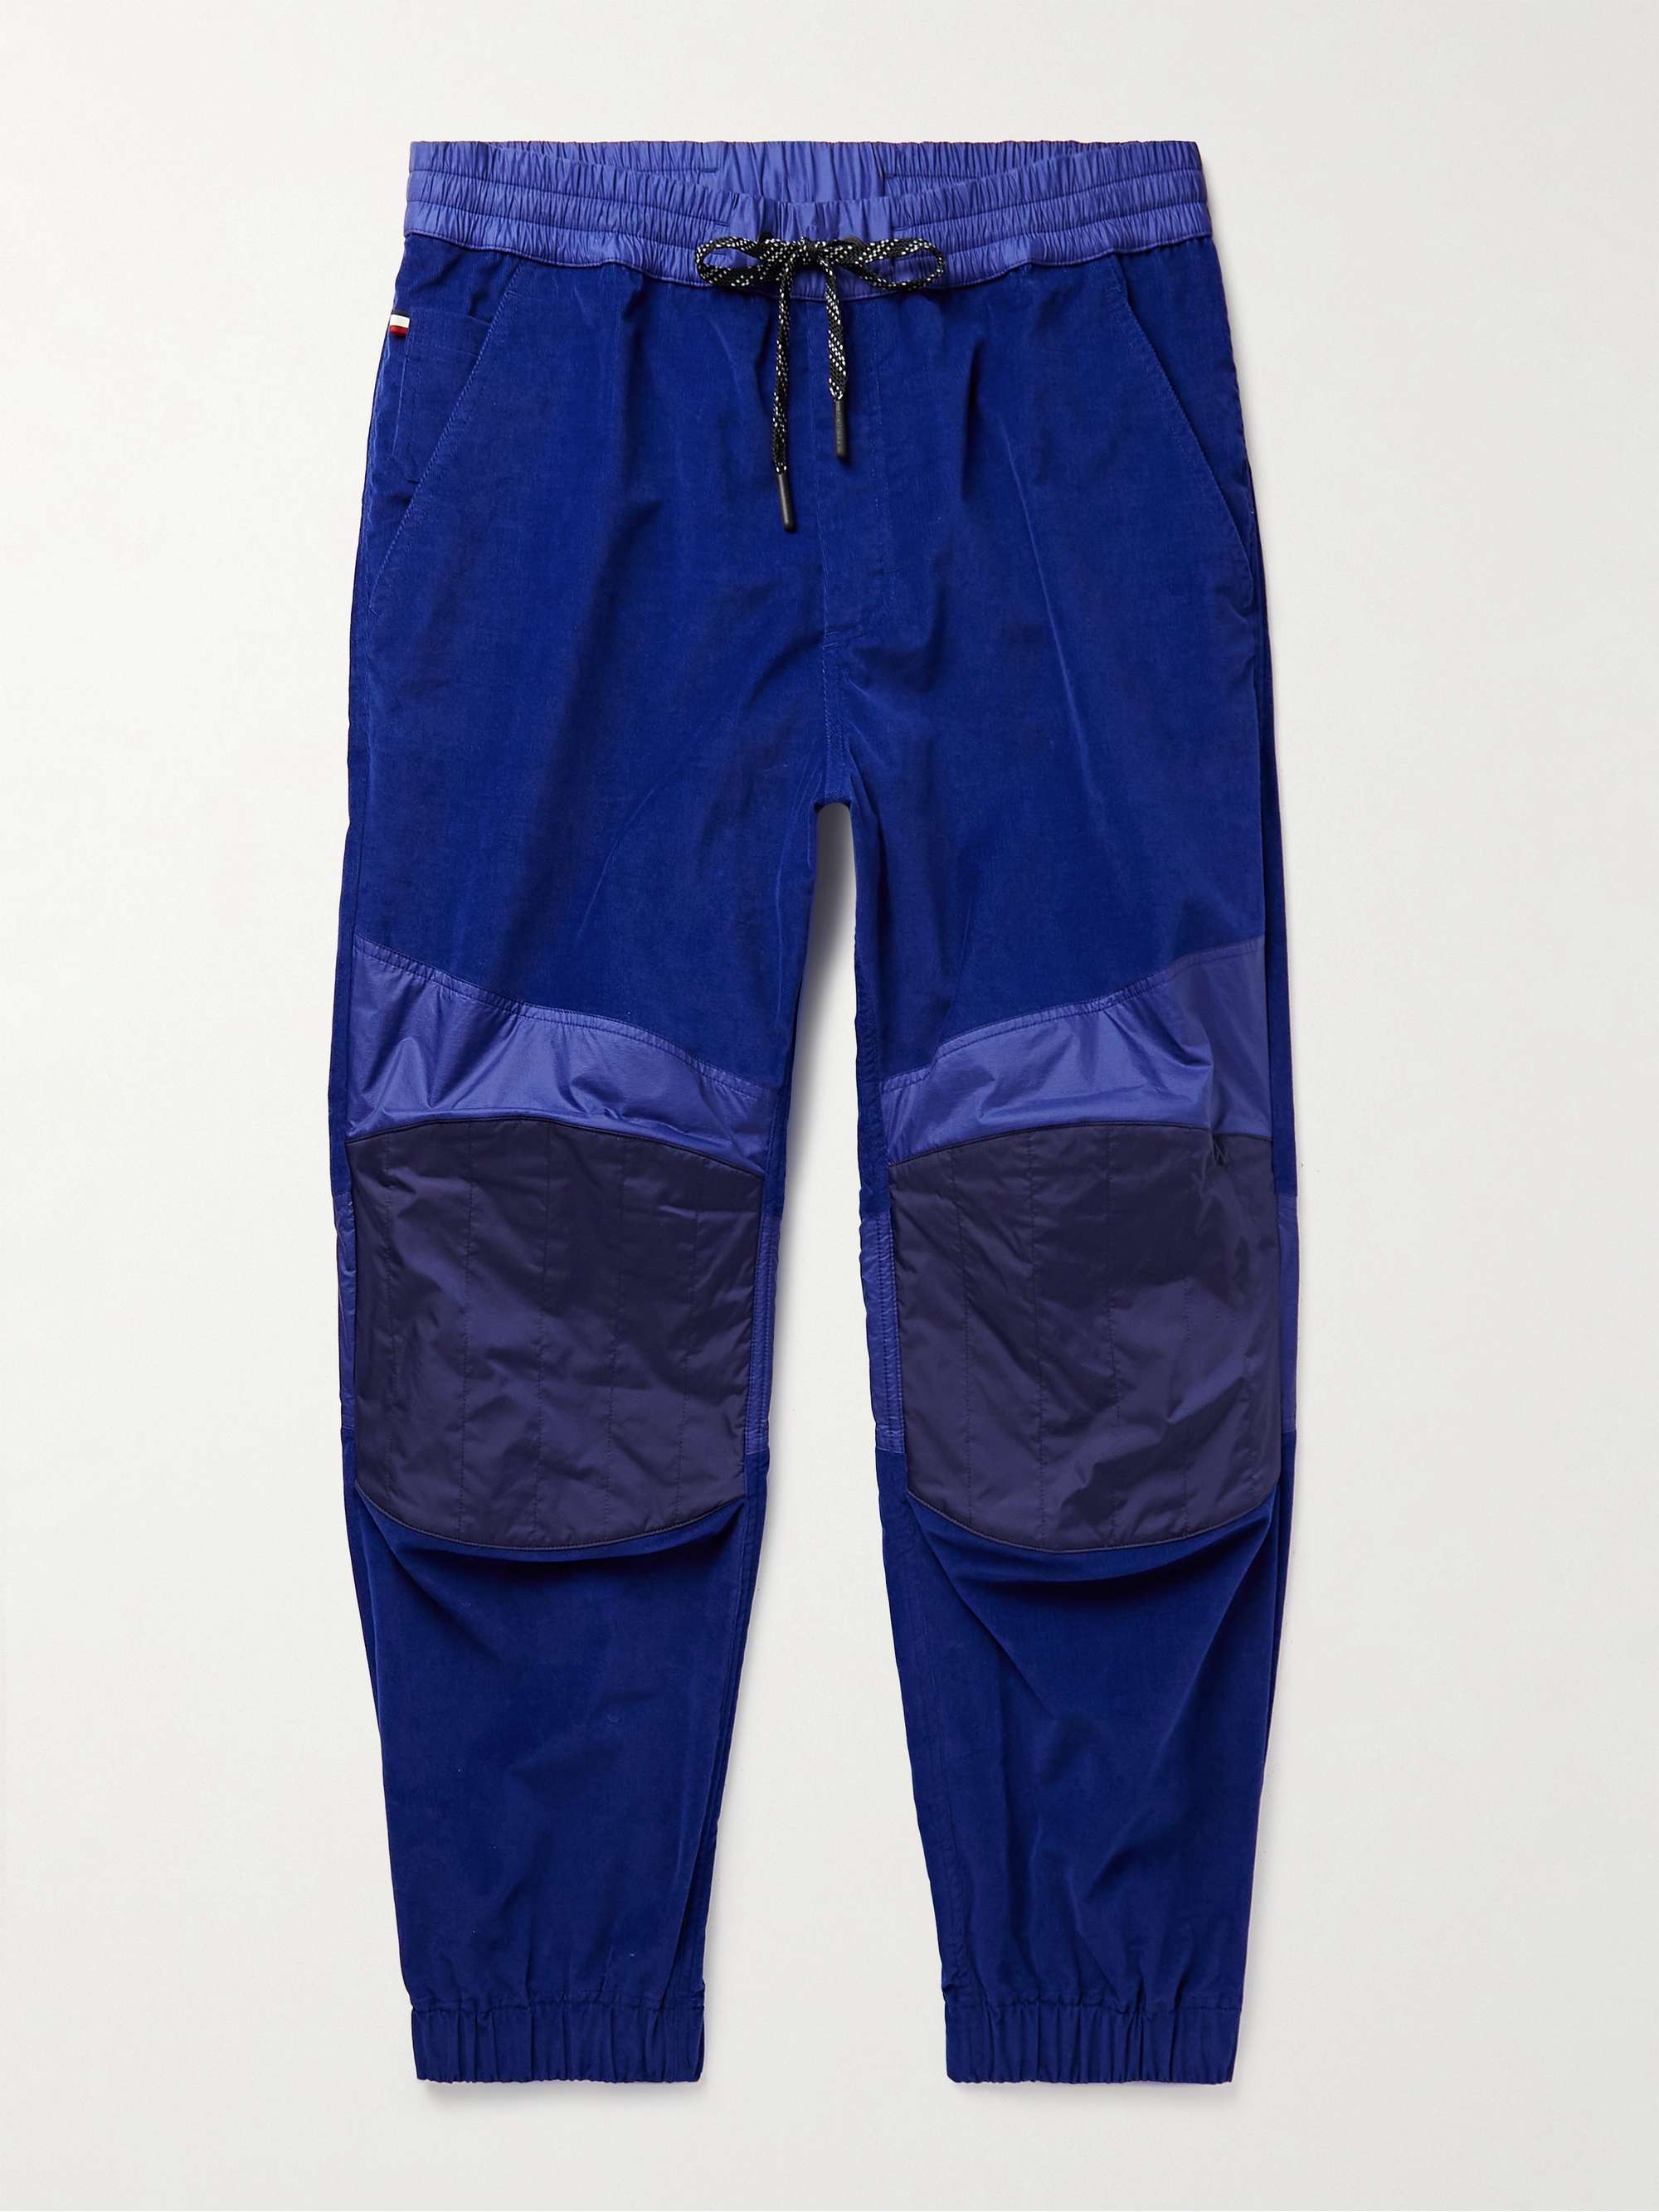 MONCLER GRENOBLE Tapered Cotton-Blend Corduroy, Ripstop and Shell Drawstring Trousers